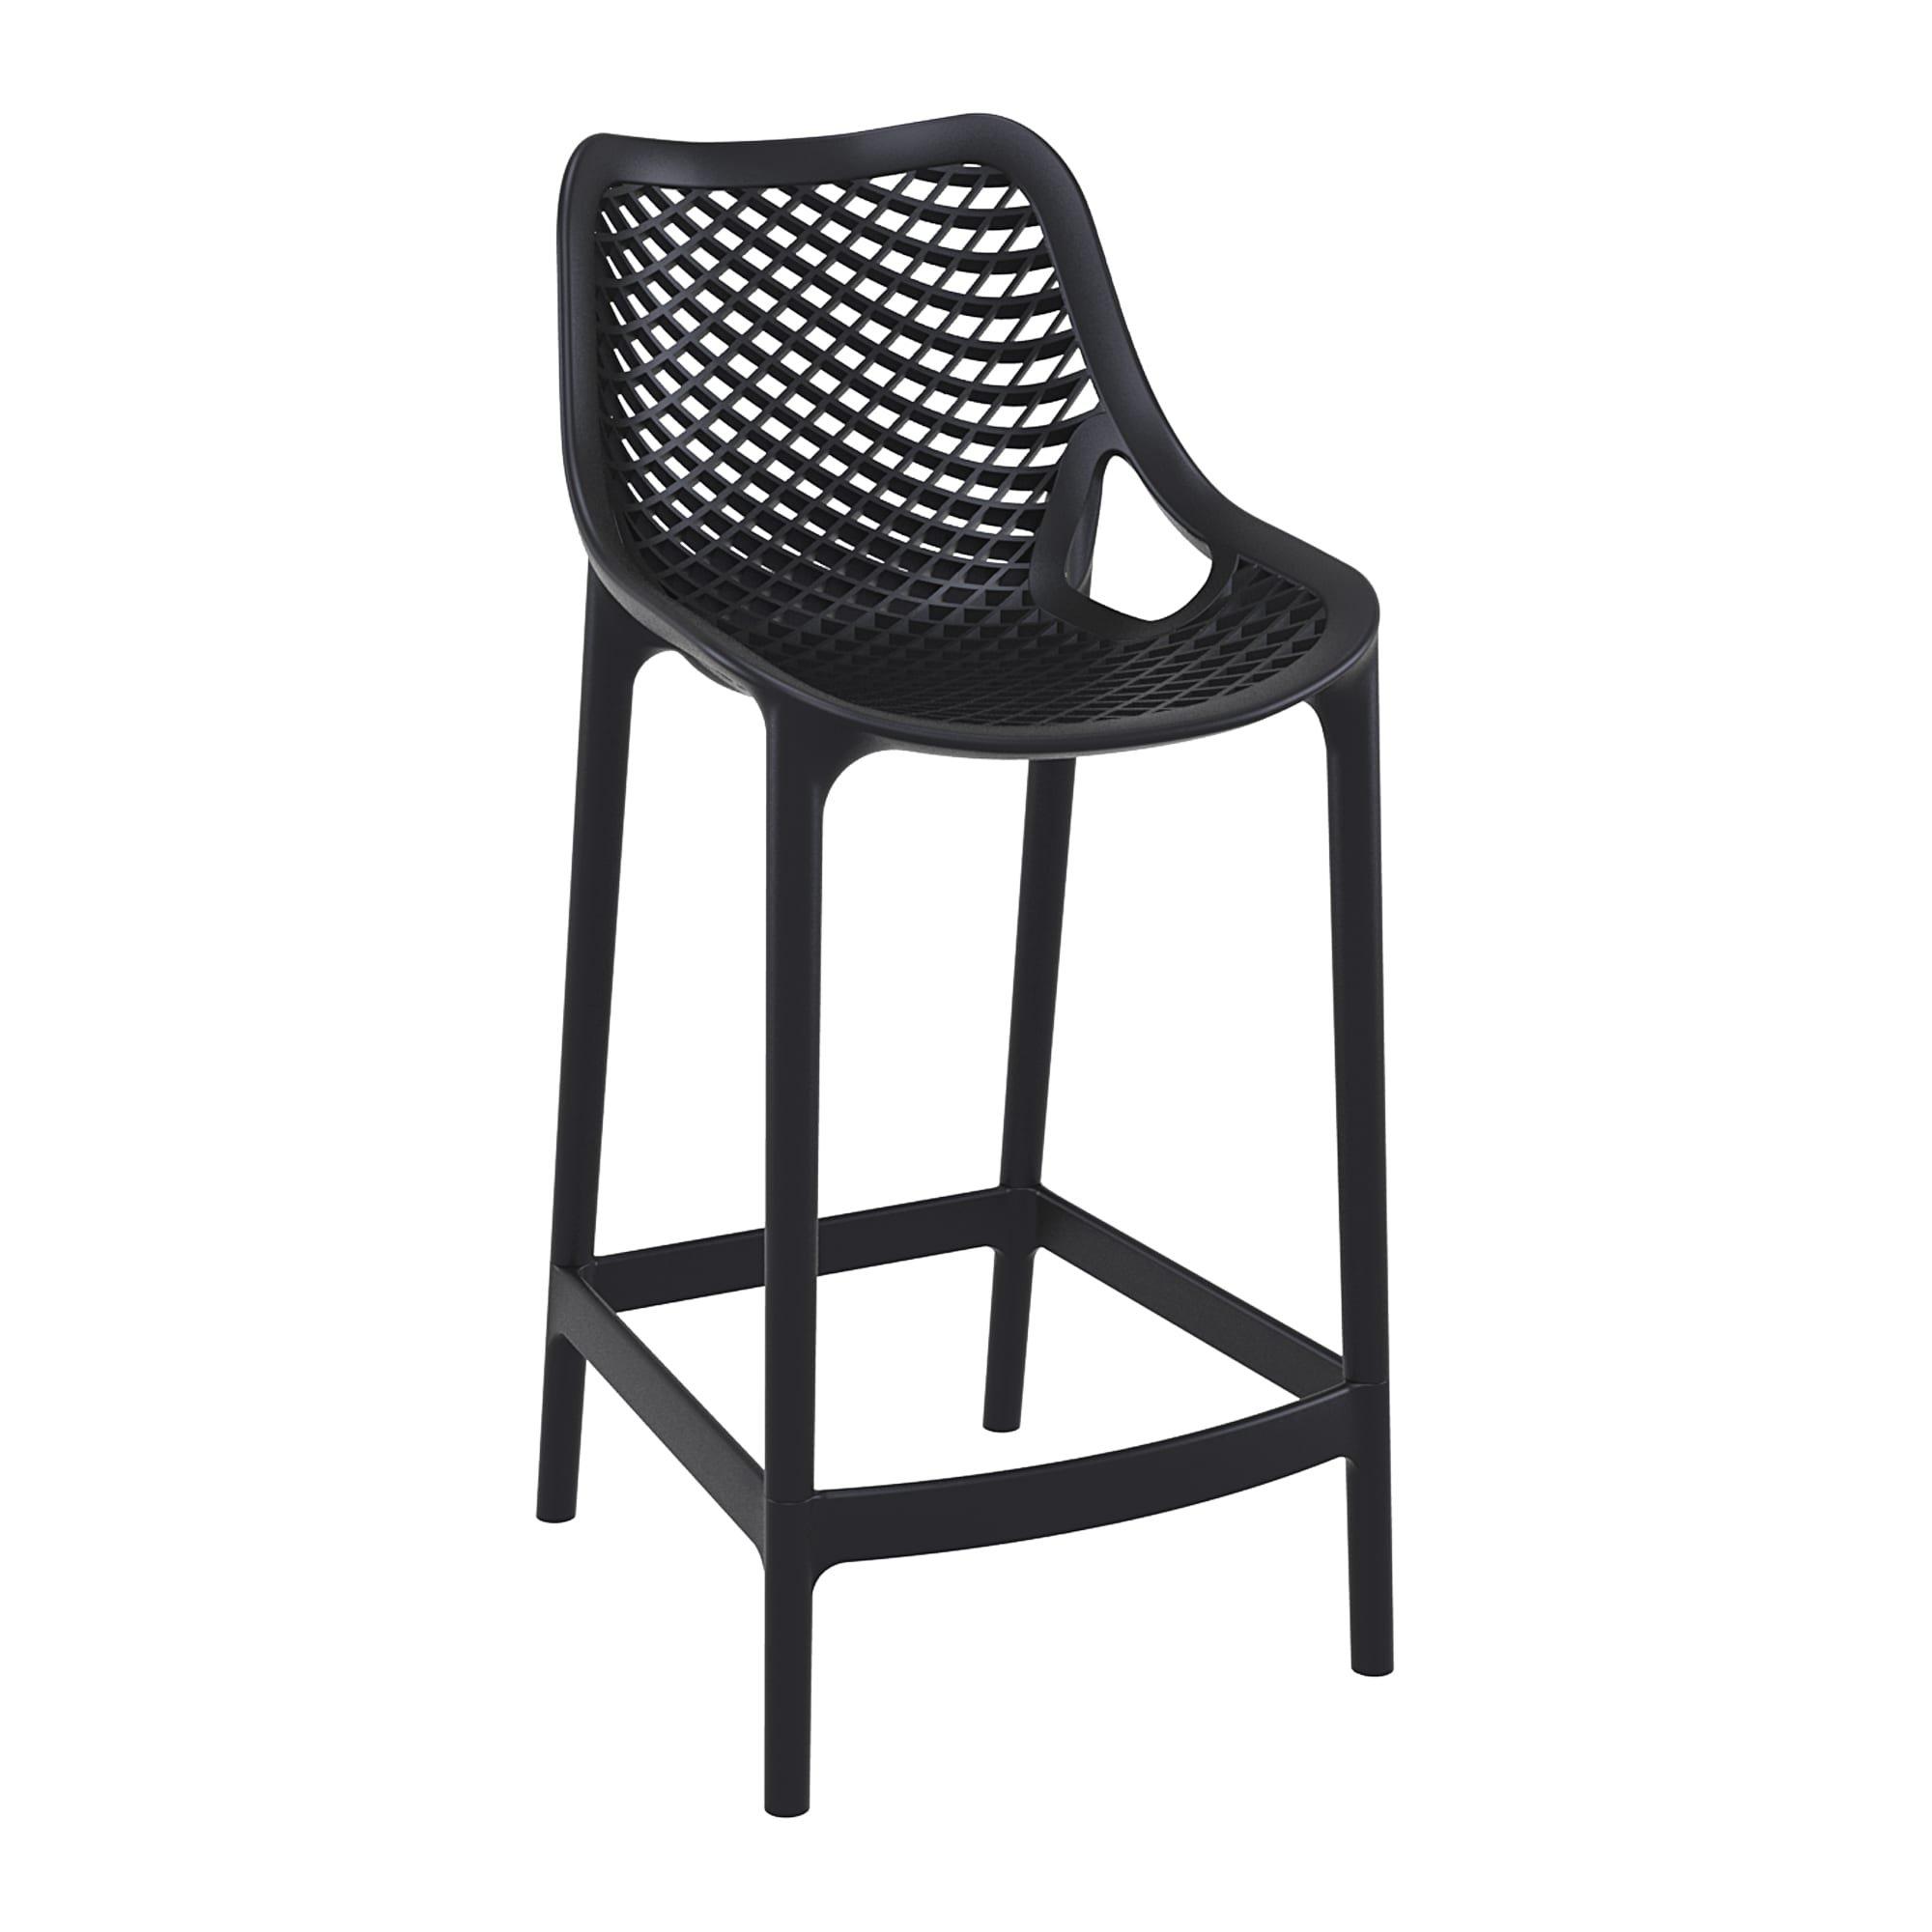 Spyro Mid Height Bar Stool 65 - Black Indoor and Outdoor Use